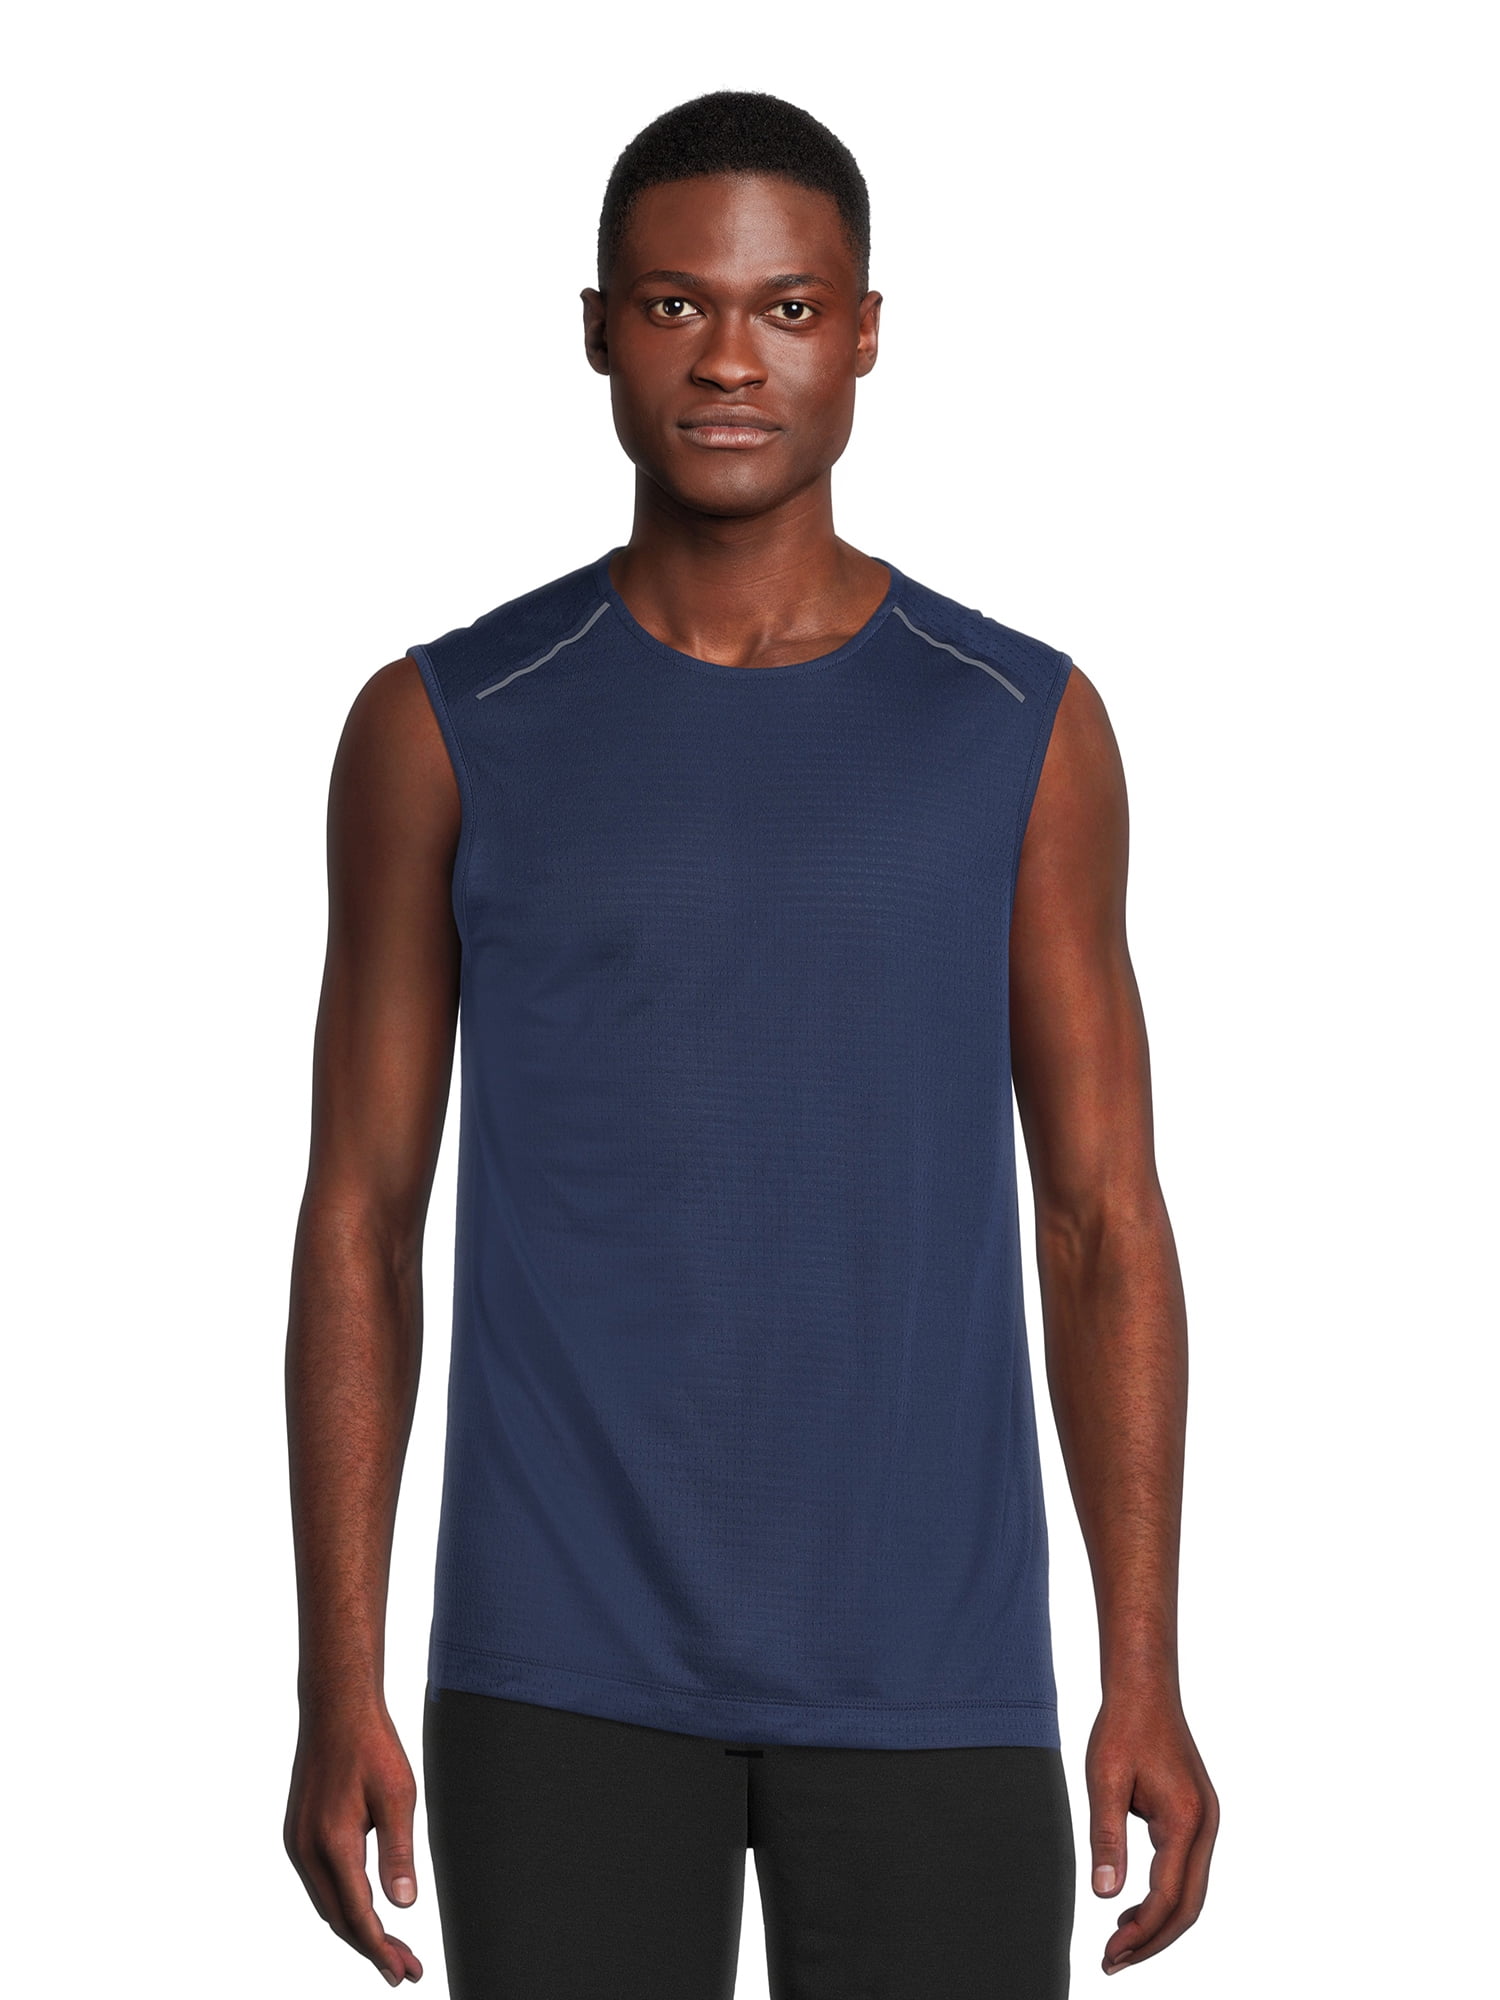 Find Your Perfect Athletic Works Men's Performance Sleeveless Muscle ...